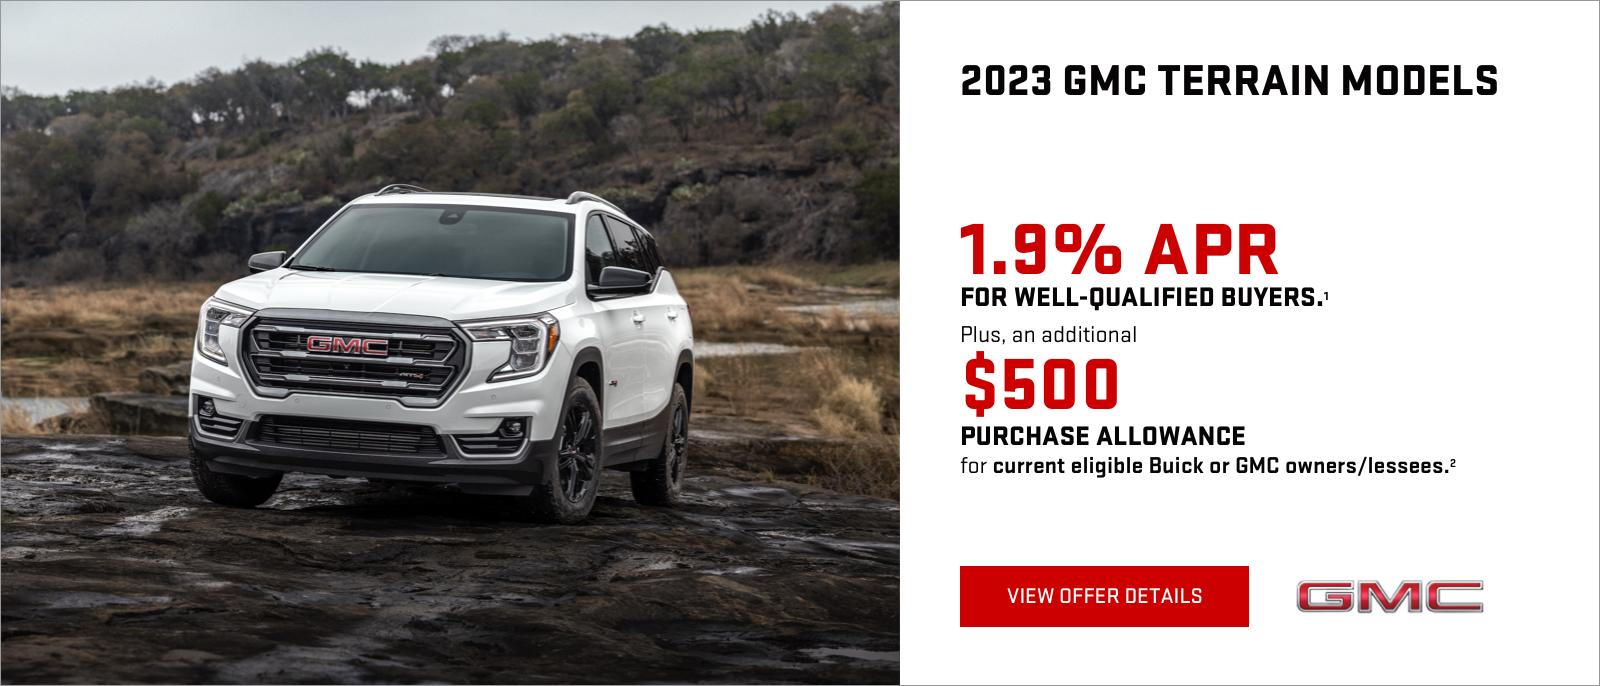 1.9% APR for well-qualified buyers.1

Plus, an additional $500 PURCHASE ALLOWANCE for current eligible Buick or GMC owners/lessees.2